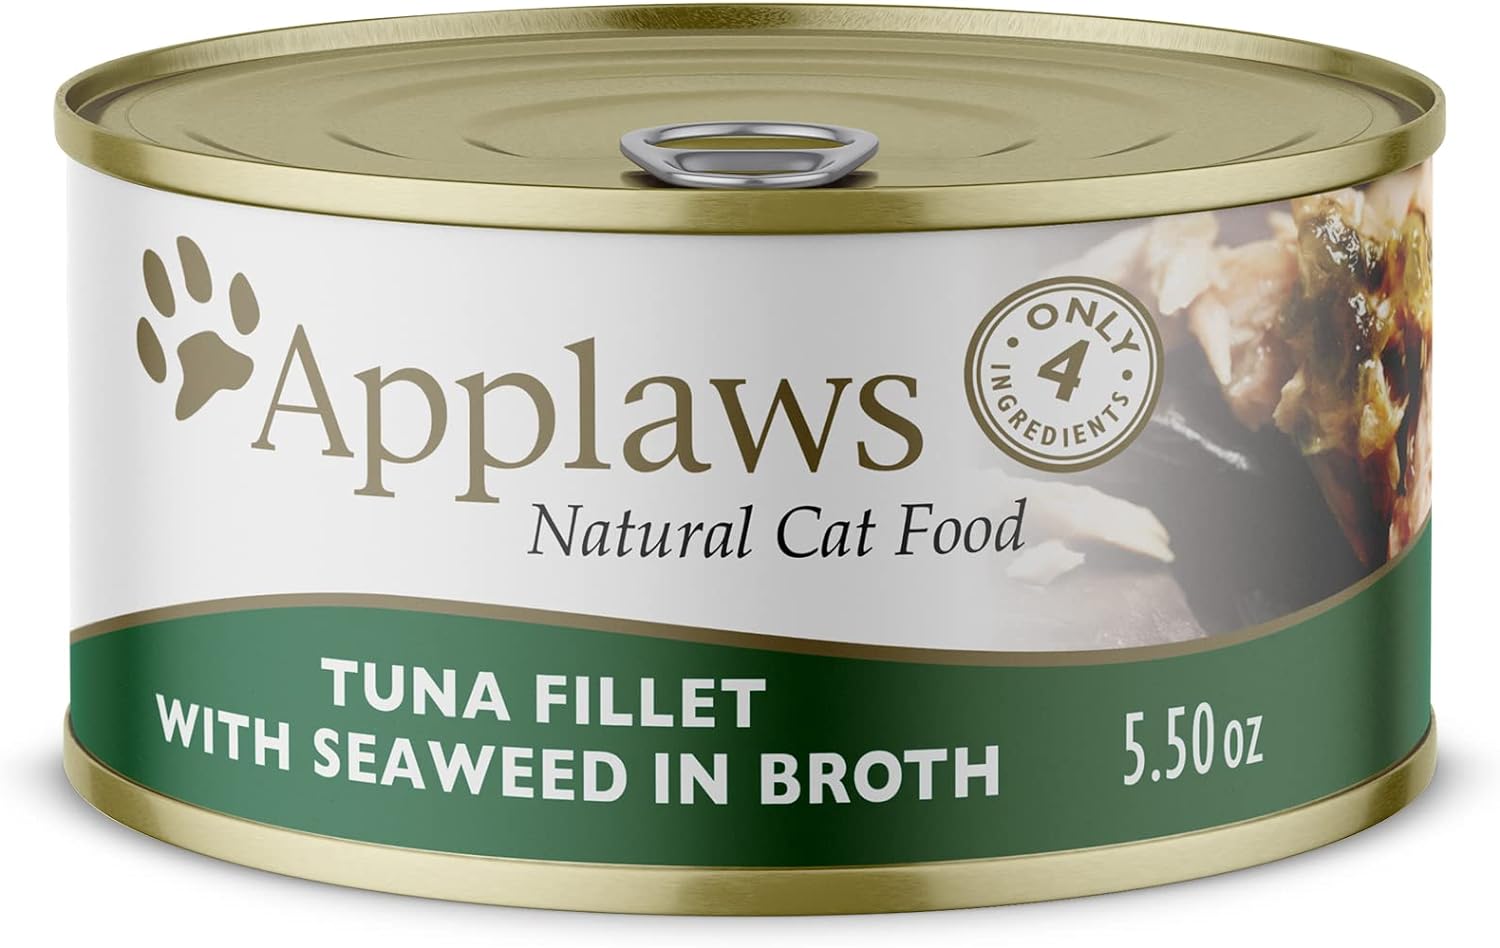 Applaws Tuna Fillet With Seaweed Canned Cat Food